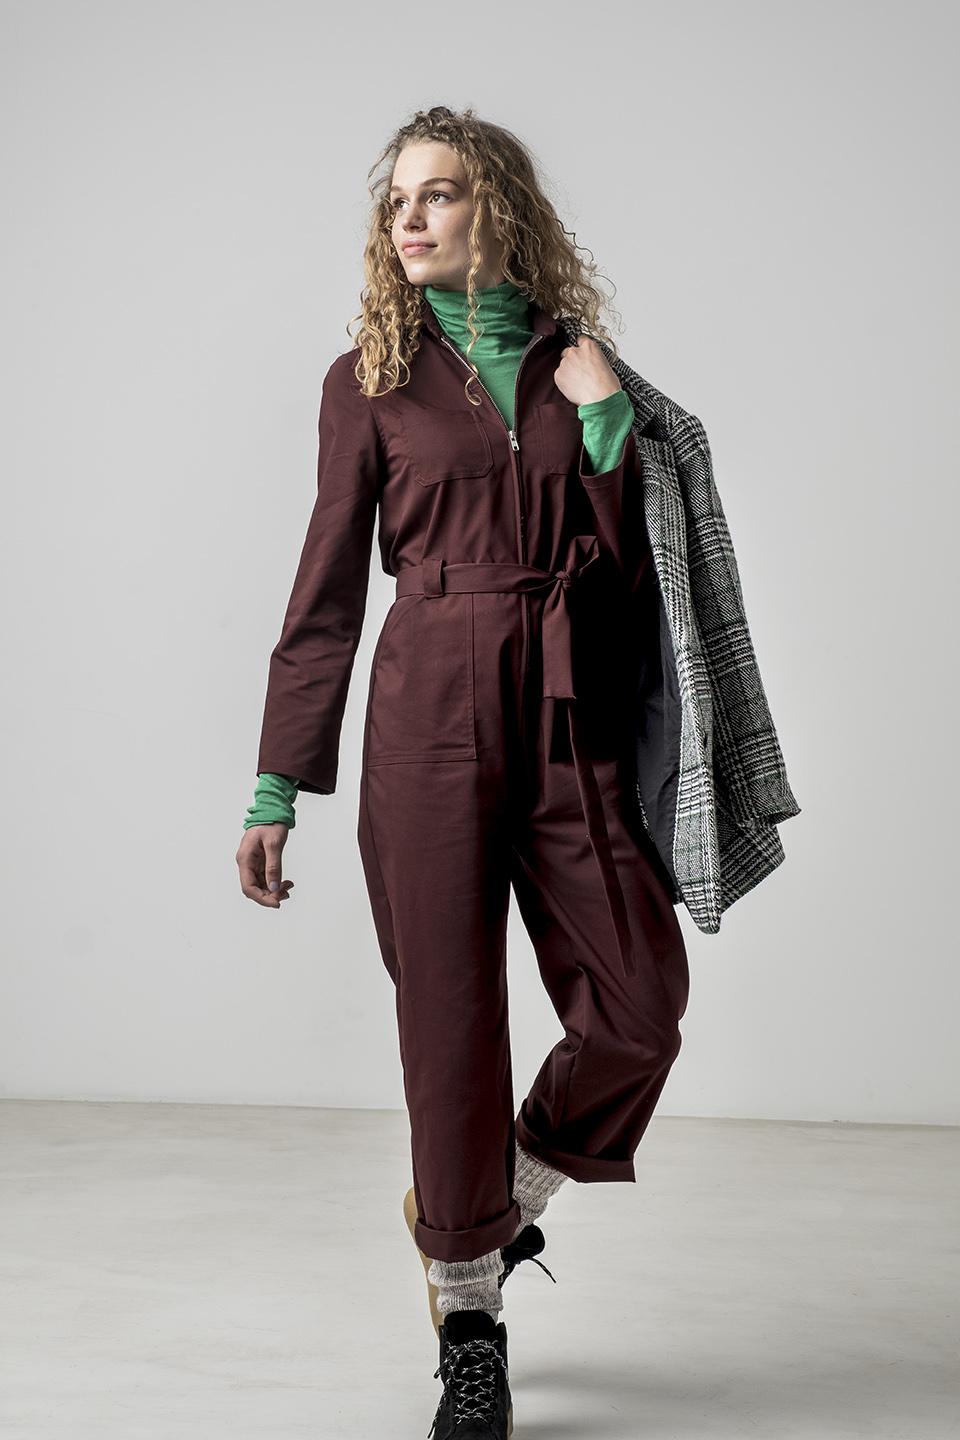 Woman wearing the Leah Jumpsuit sewing pattern from Fibre Mood on The Fold Line. A boilersuit/workwear overall pattern made in cotton, denim or corduroy fabrics, featuring topstitching, chest pockets, hip pockets, back yoke, belt and belt loops, front zip